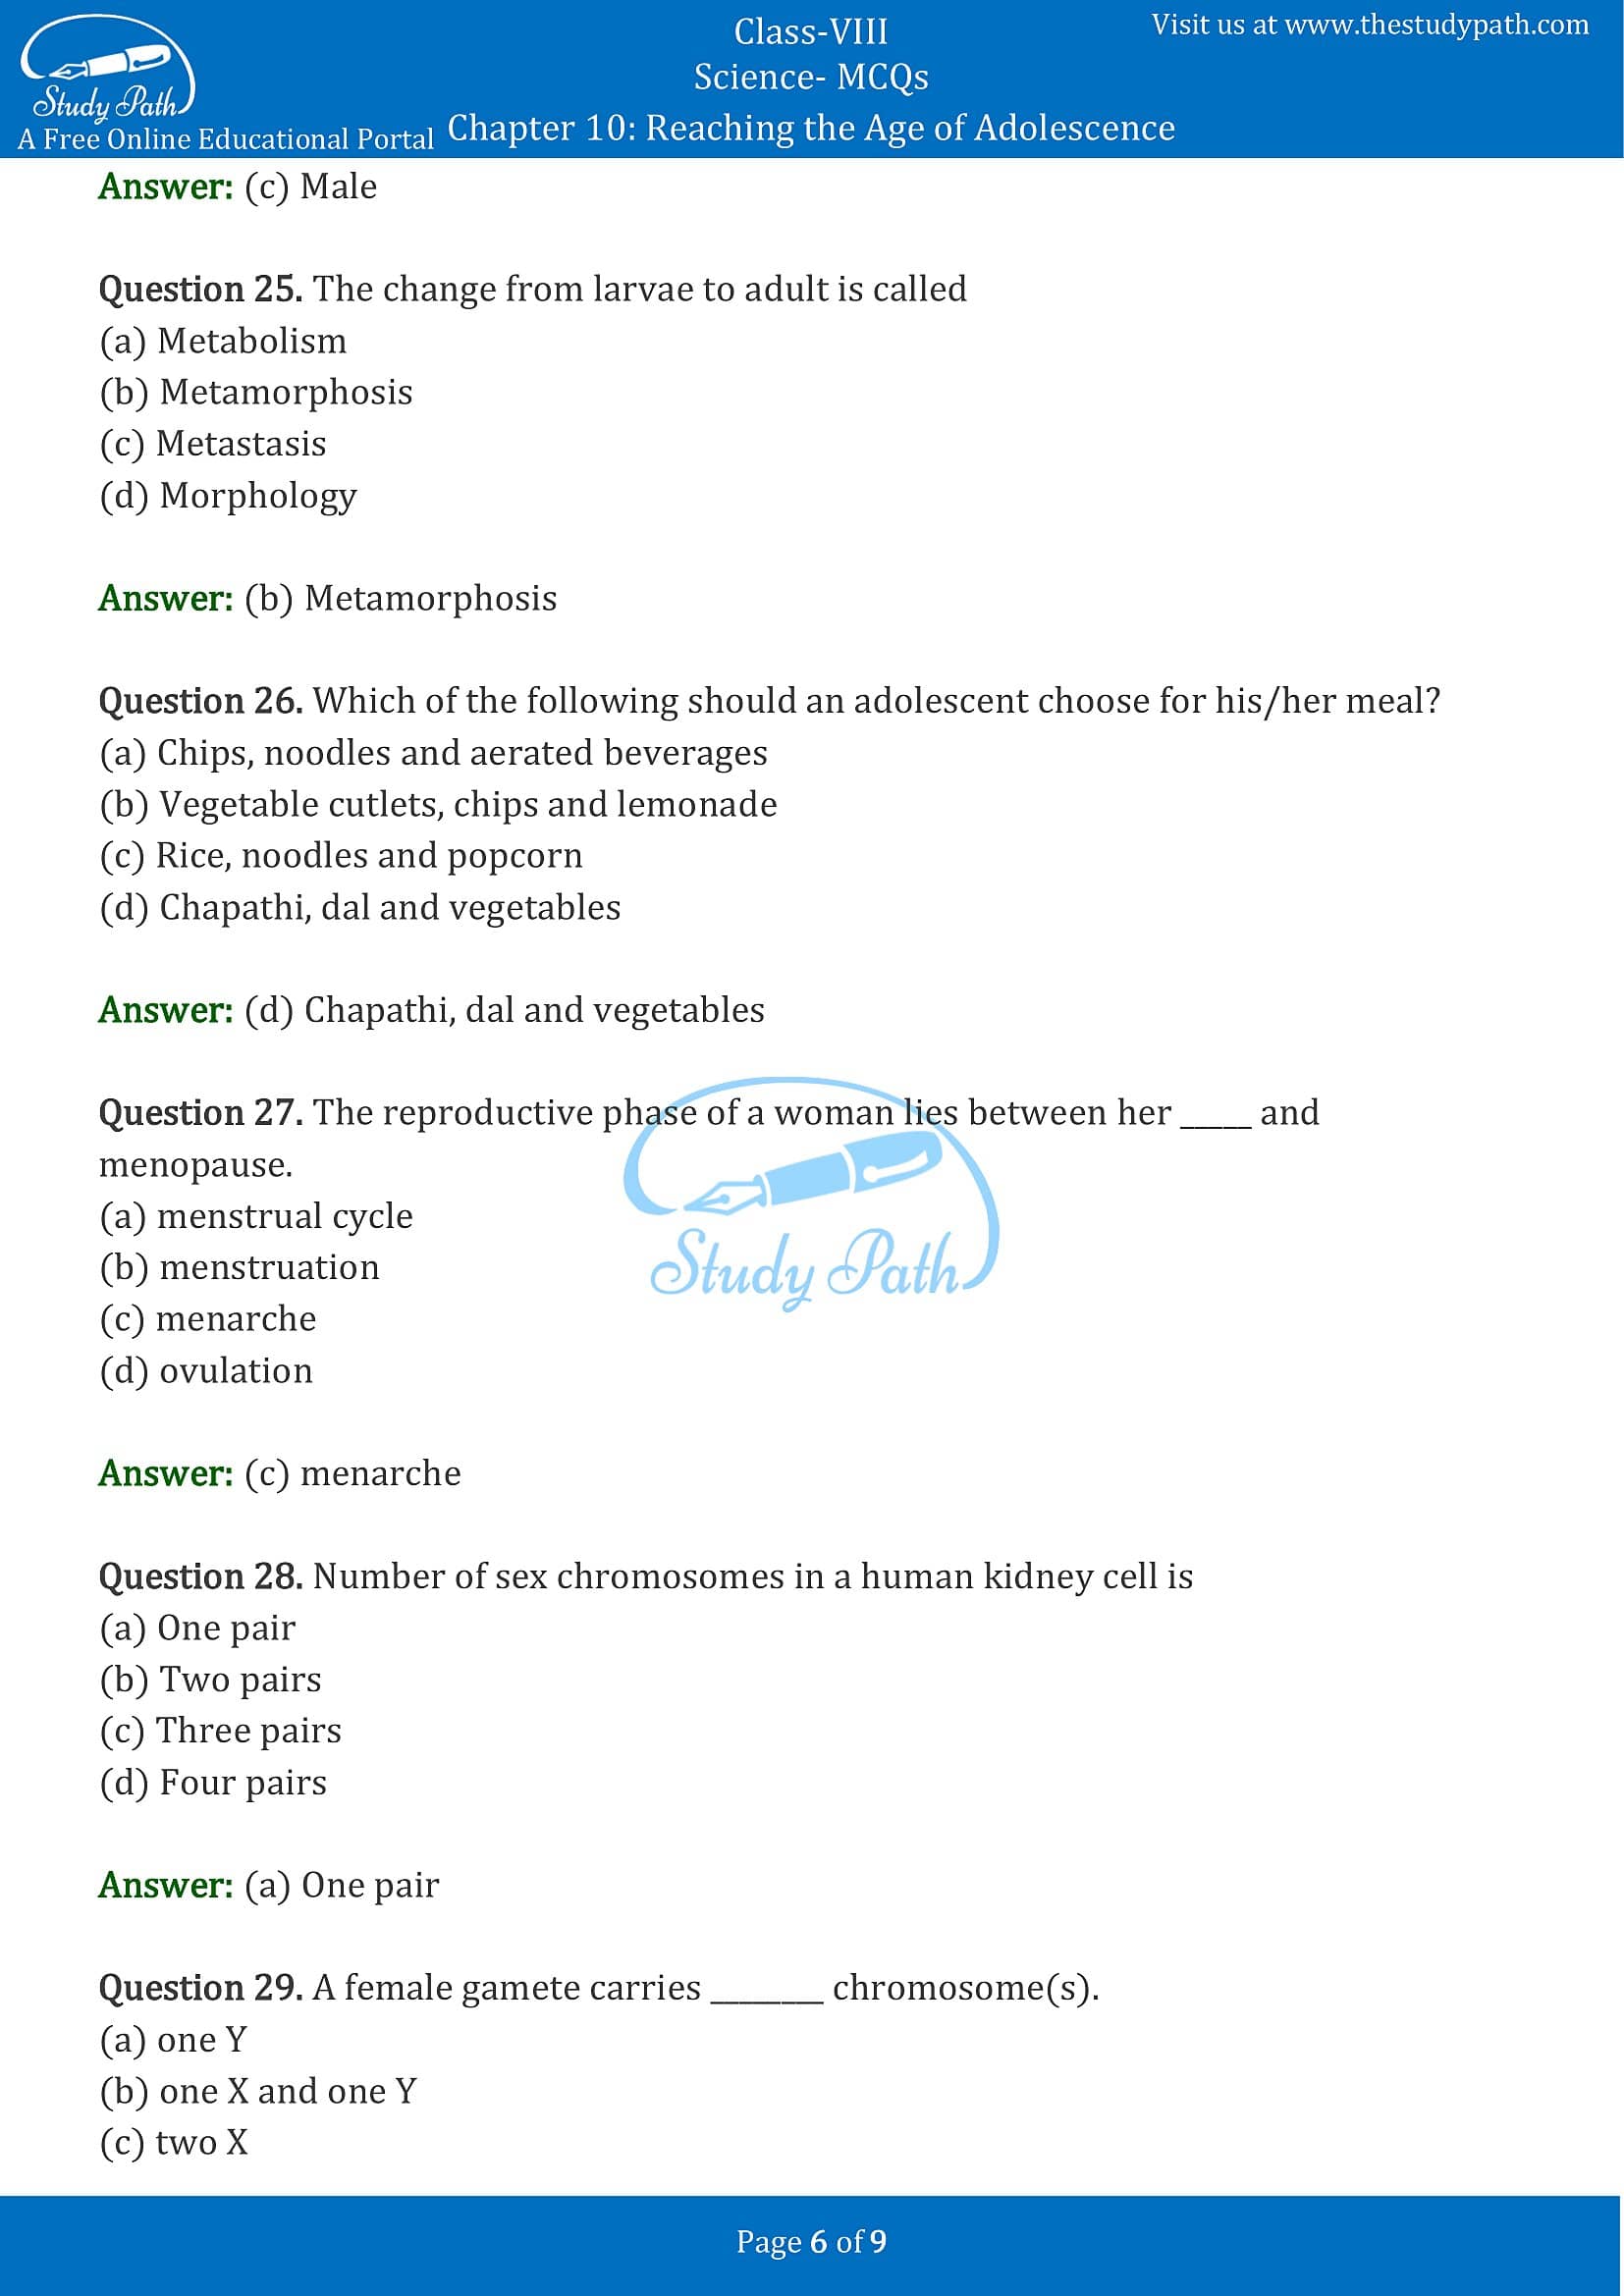 MCQ Questions for Class 8 Science Chapter 10 Reaching the Age of Adolescence with Answers PDF -6